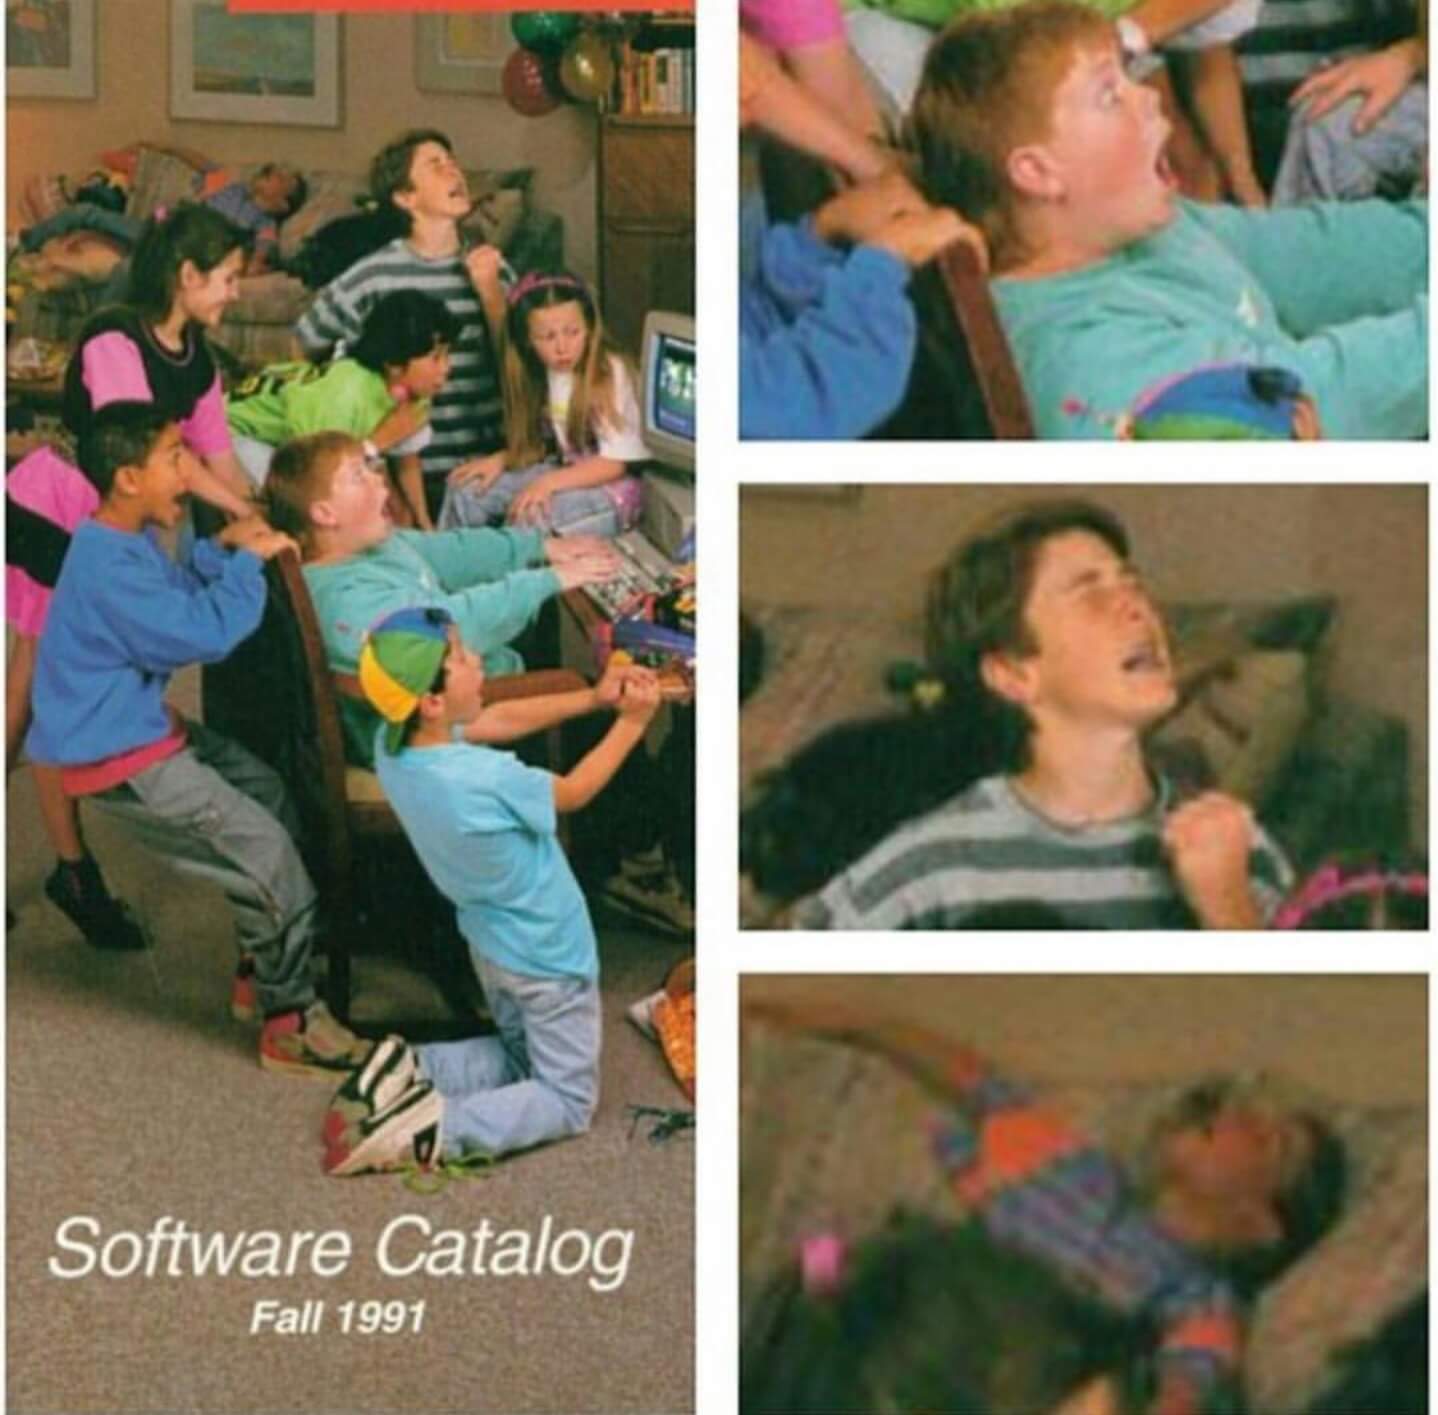 Kids in the 90's playing PC games.